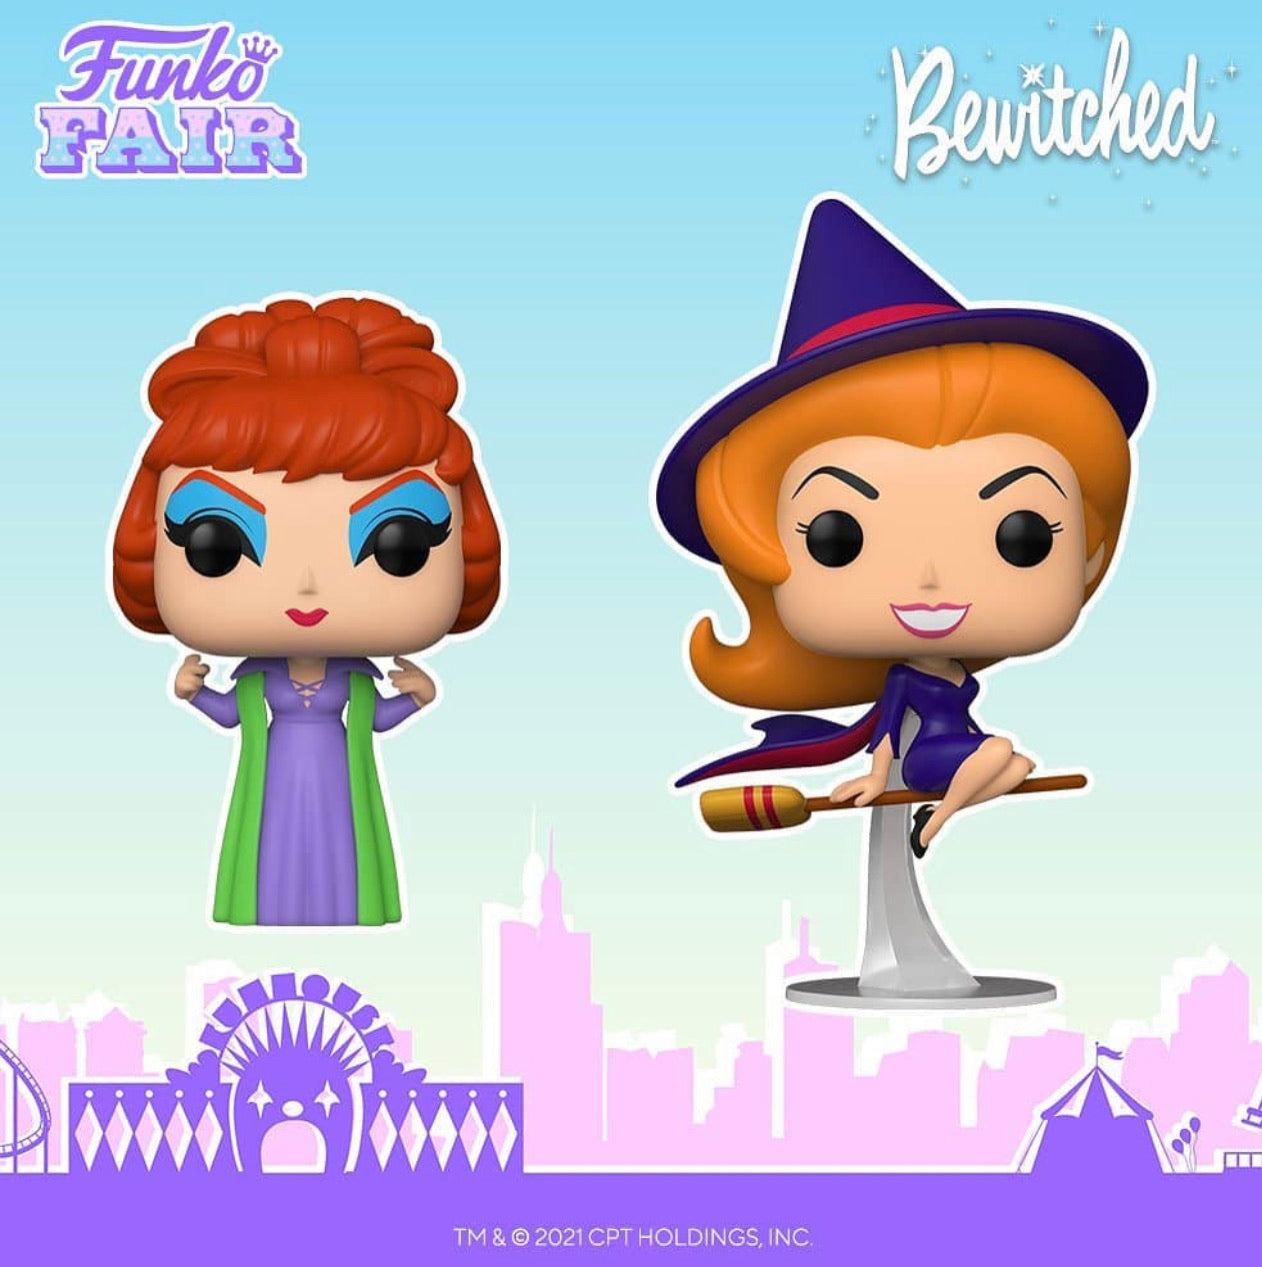 Funko Pop! TV Bewitched Bundle Of 2